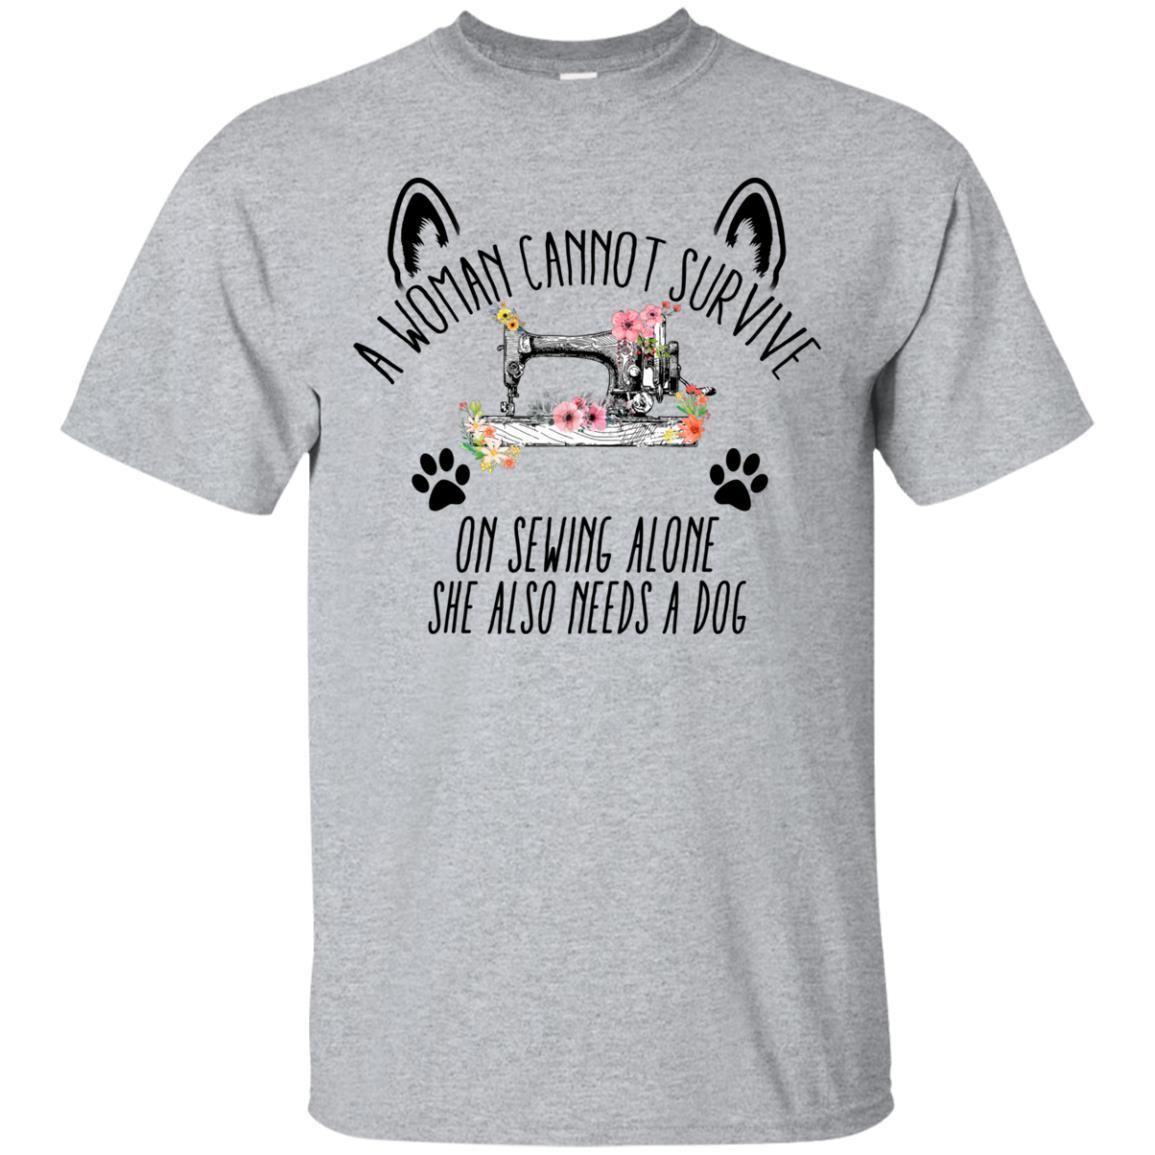 Sewing A Woman Can Not Survive She Aloso Needs A Dog T Shirt